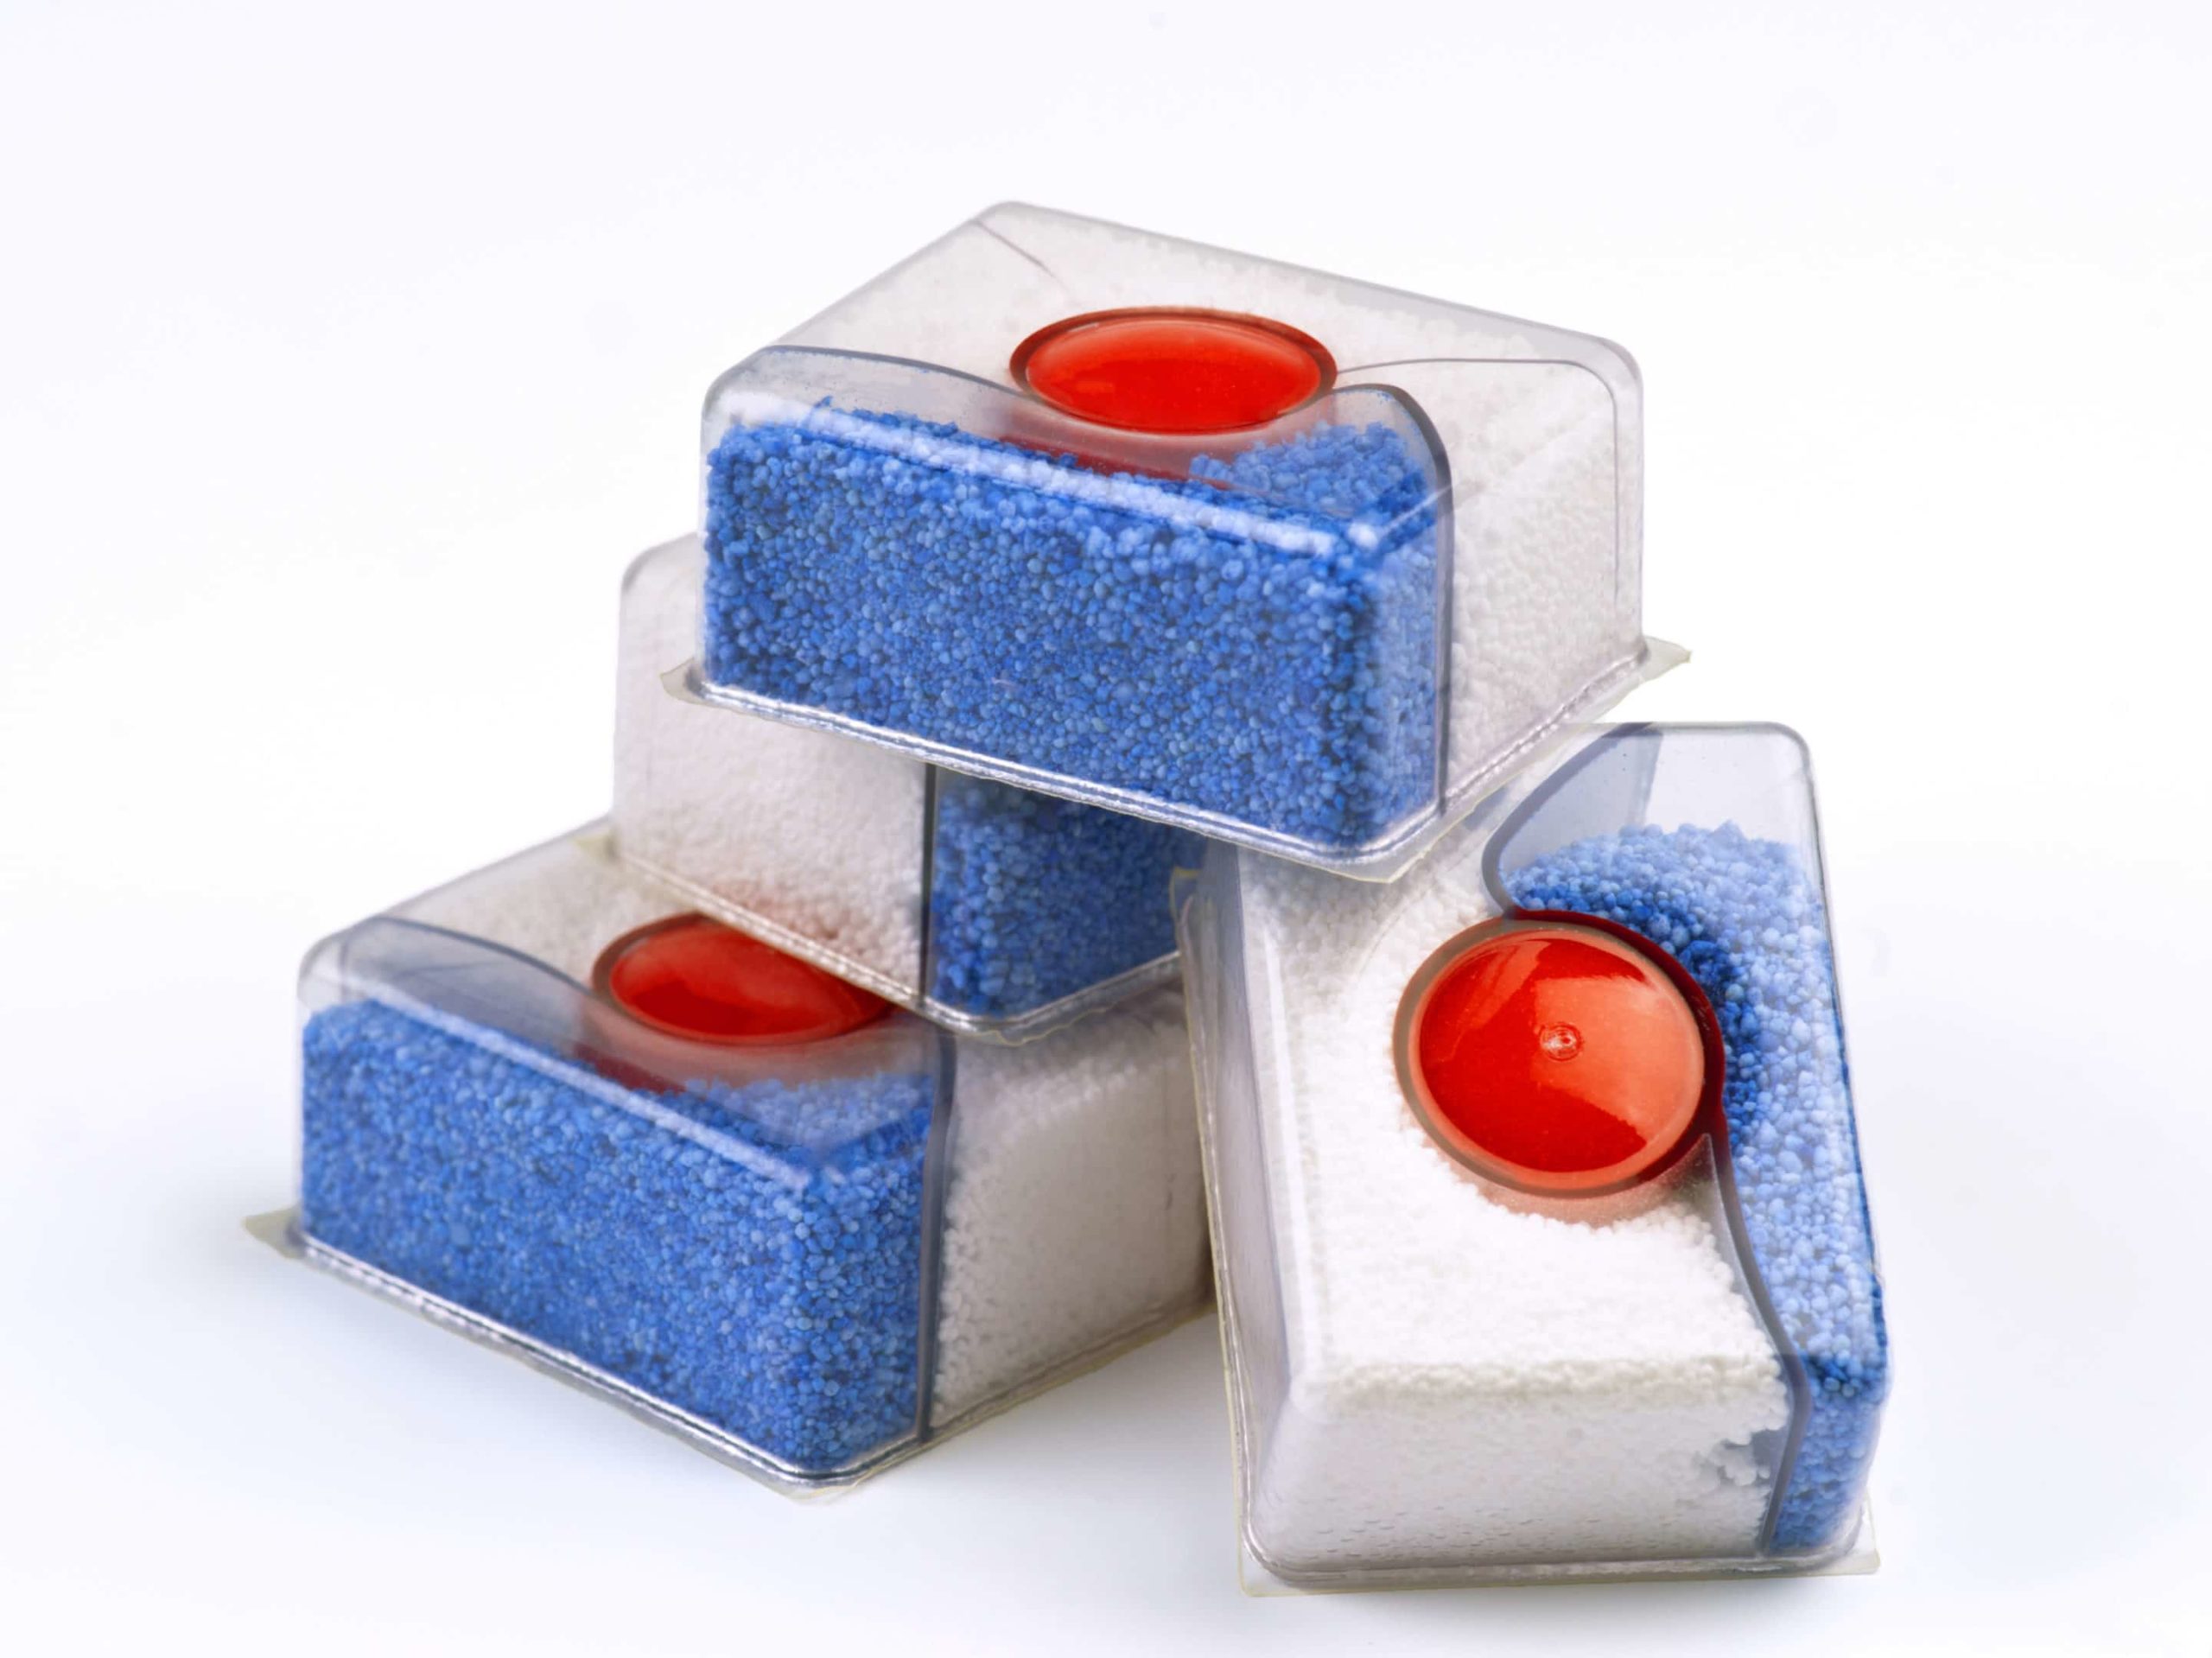 Are dishwasher tablets and liquitabs dangerous? - First Aid for Life